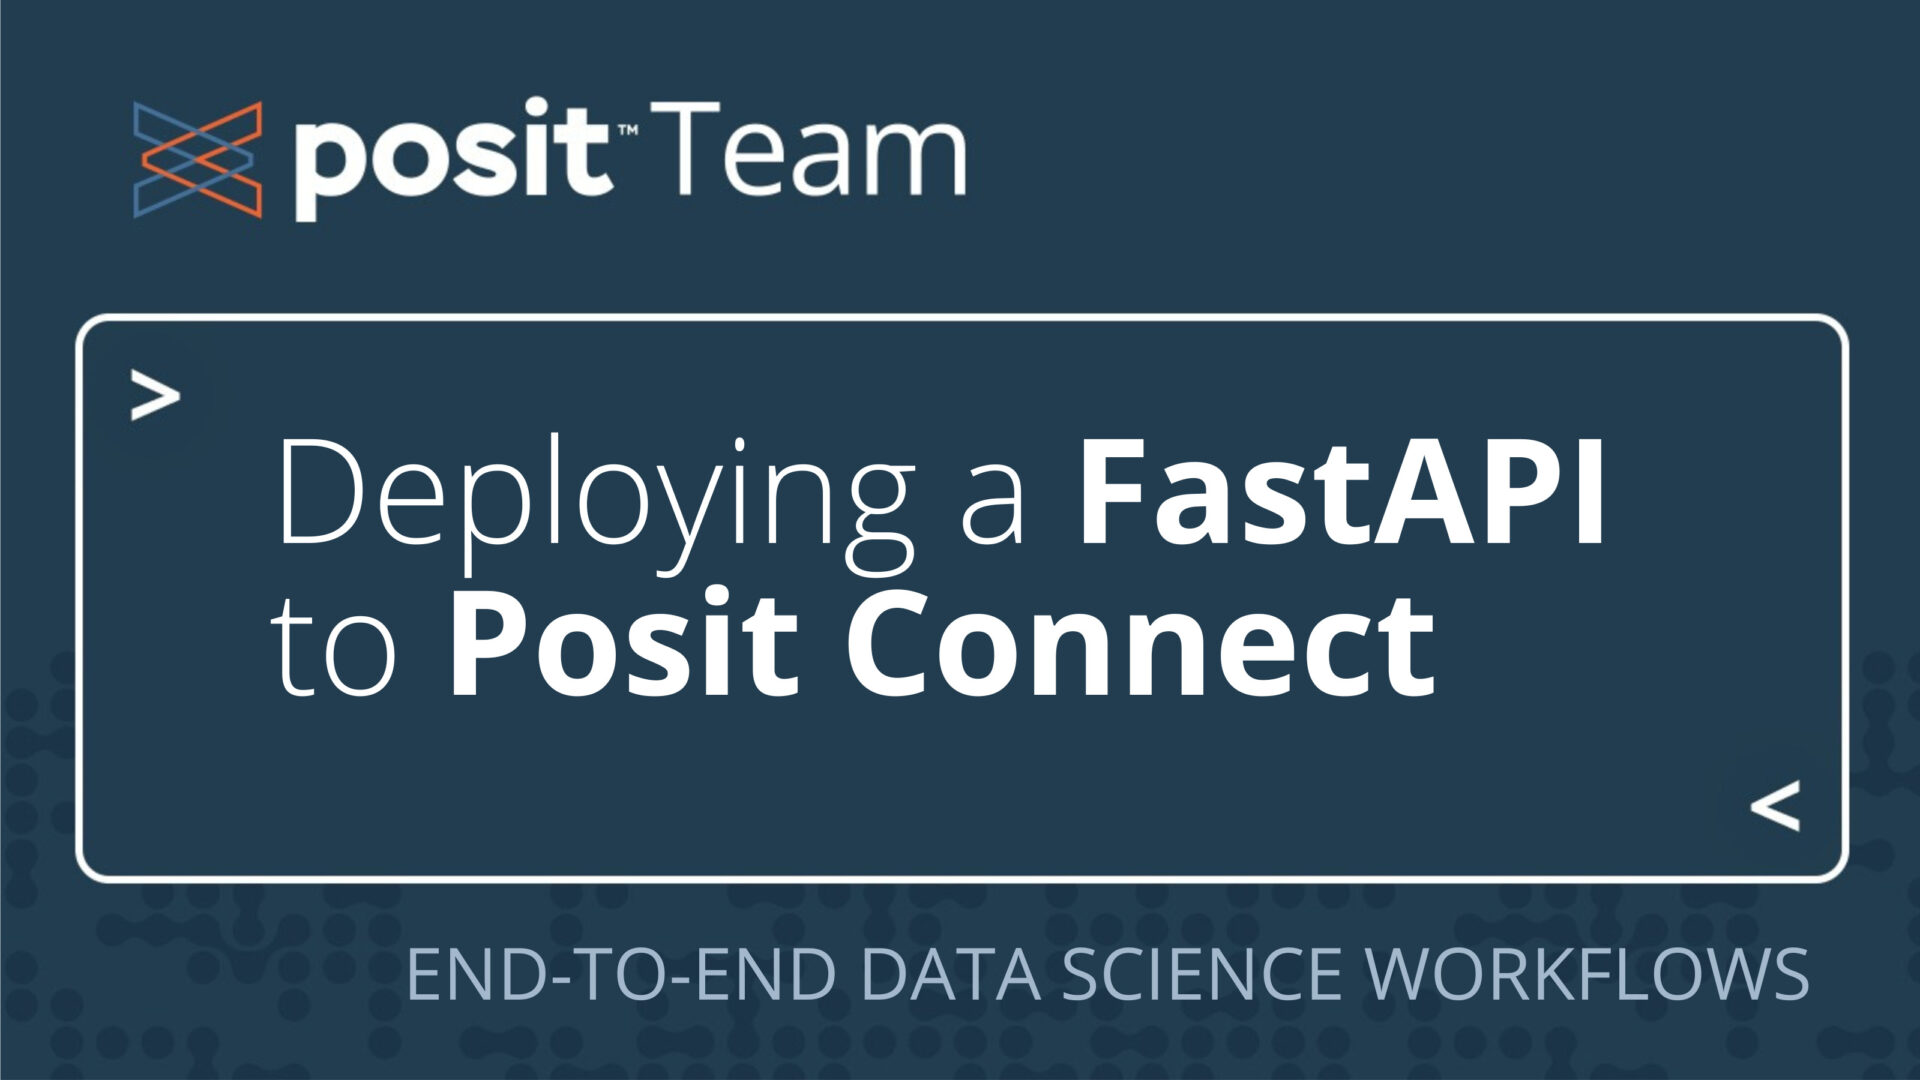 The Posit Team logo. Underneath, text that says: "Deploying a FastAPI to Posit Connect. End-to-end data science workflows."